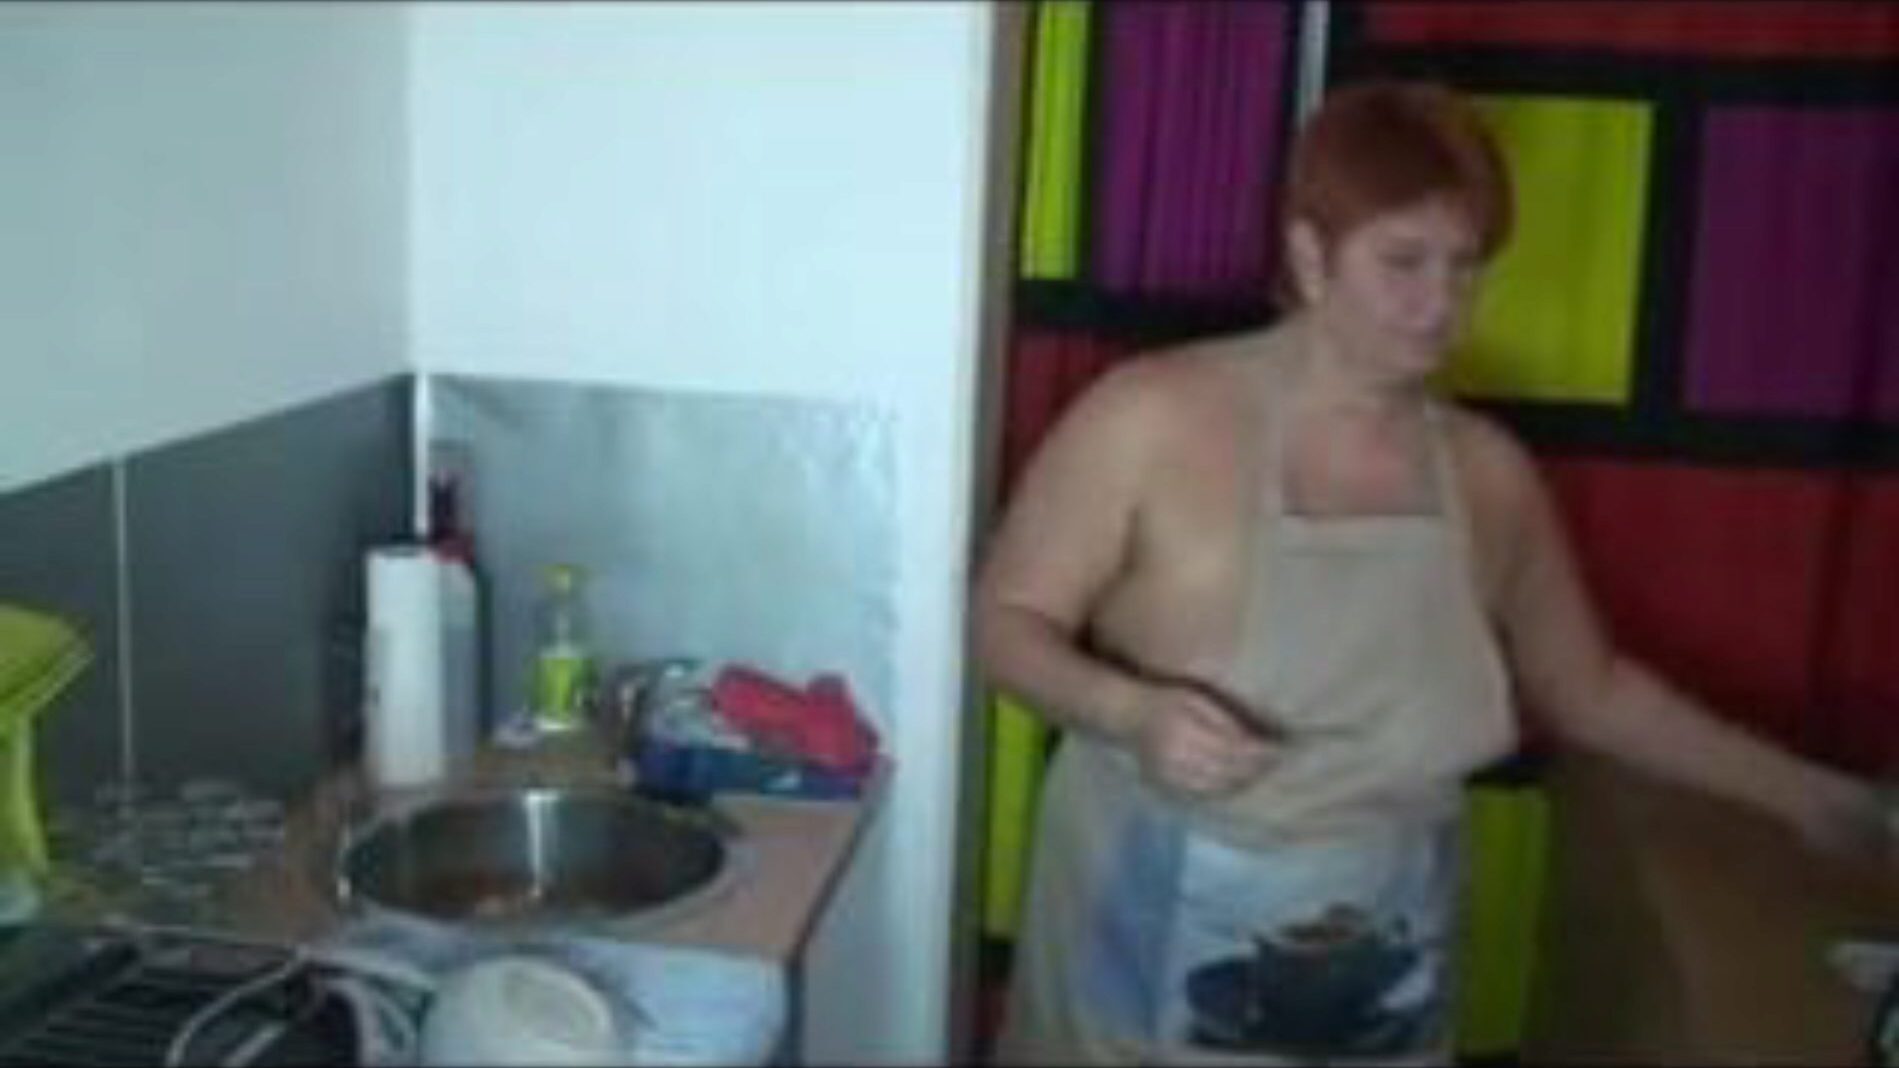 When Washing Dishes in the Kitchen, Free Porn 55: xHamster Watch When Washing Dishes in the Kitchen clip on xHamster, the giant sex tube site with tons of free German Hottest & Sounding porno vids